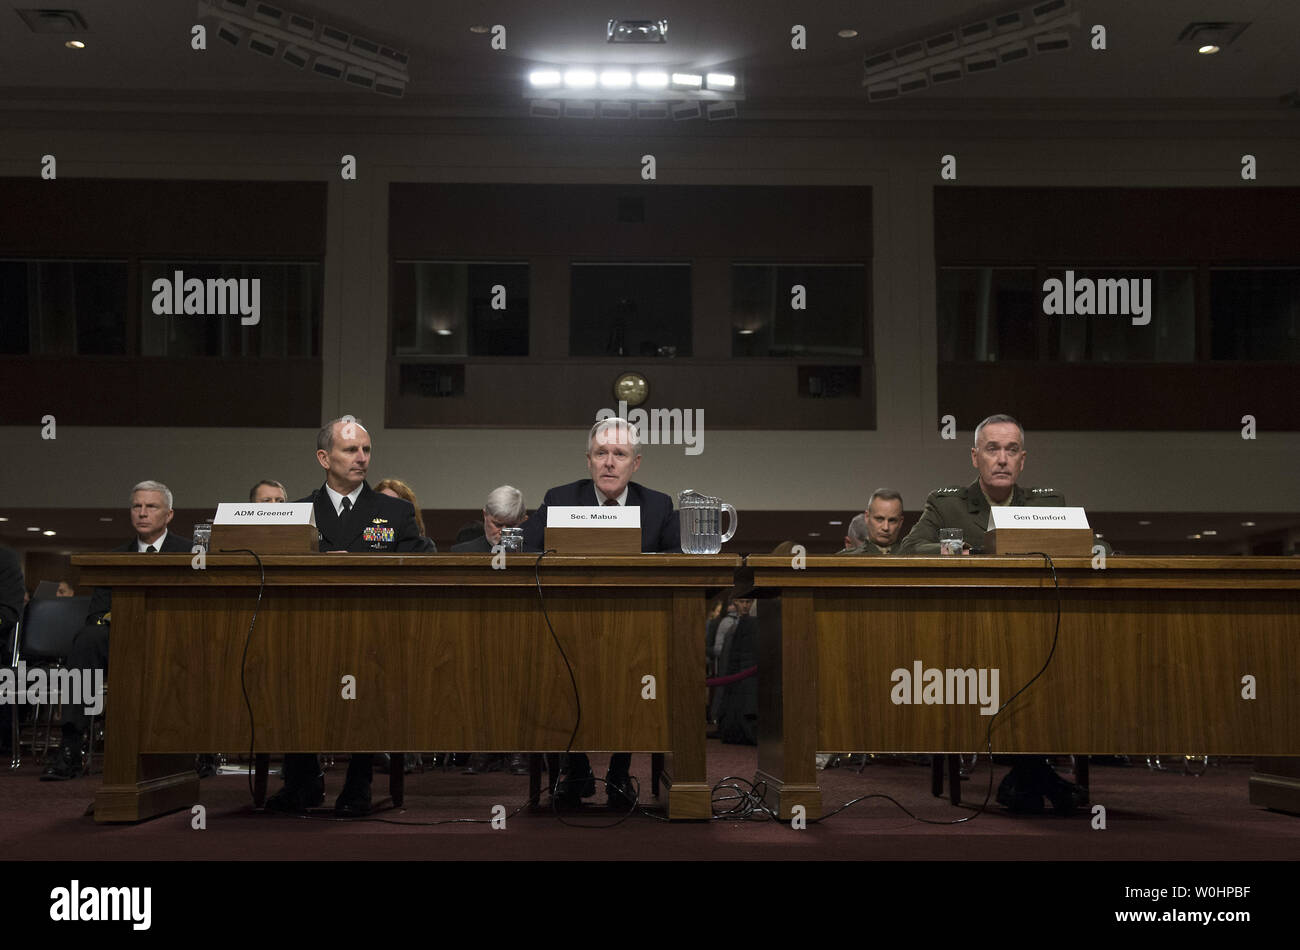 From left to right, Adm. John Greenert, Chief of Naval Operations, Secretary of the Navy Raymond Mabus Jr., and Gen. Joseph Dunford Jr., commandant of the Marine Corp., testifies during a Senate Armed Services Committee hearing on the posture of the Navy in review of the Defense Authorization Request for FY2016, on Capitol Hill in Washington, D.C. on March 10, 2015. Photo by Kevin Dietsch/UPI Stock Photo